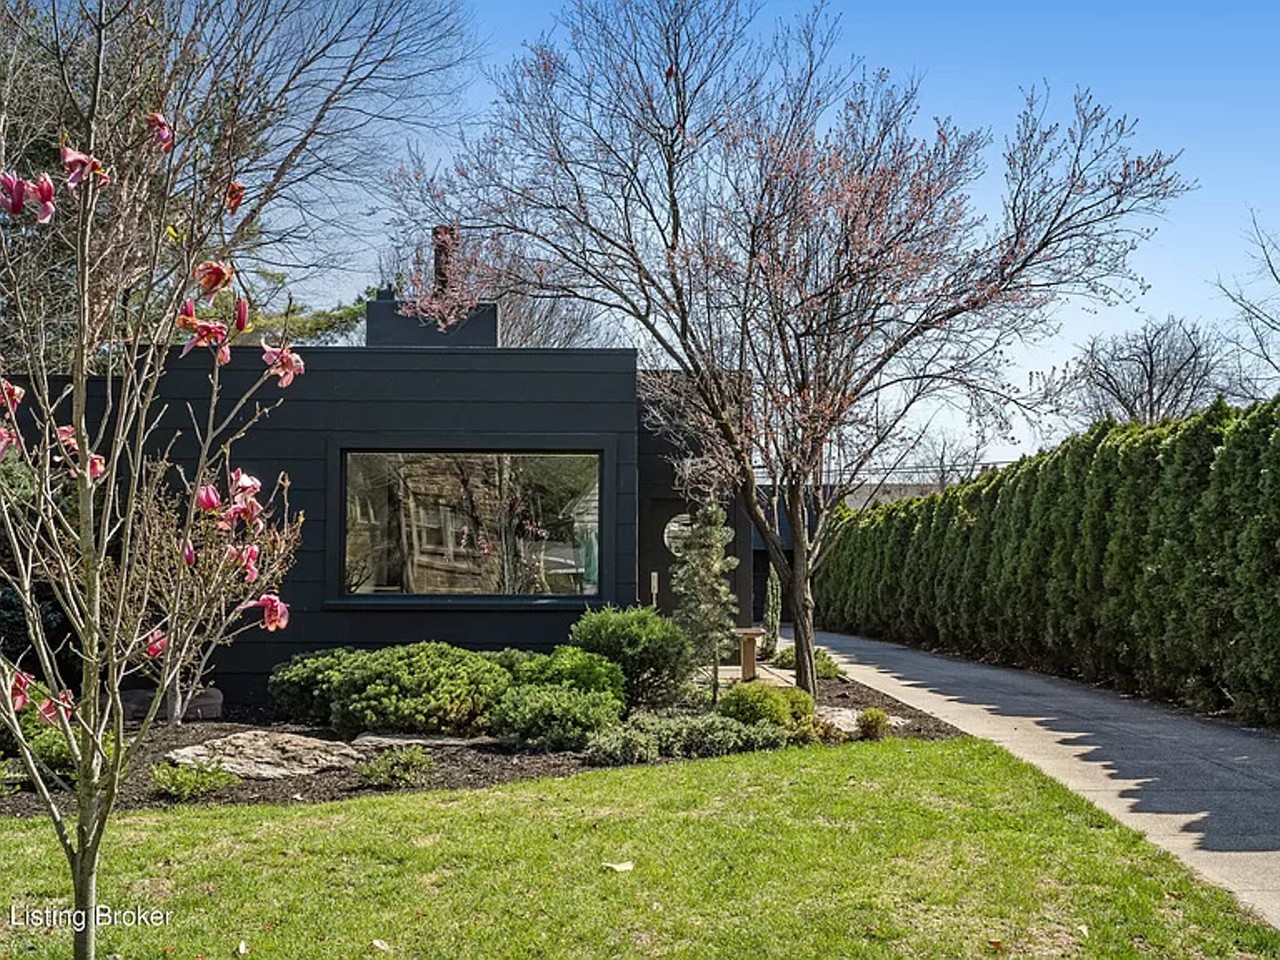 PHOTOS: This HGTV Famous Home Can Be Yours For Half A Million Dollars